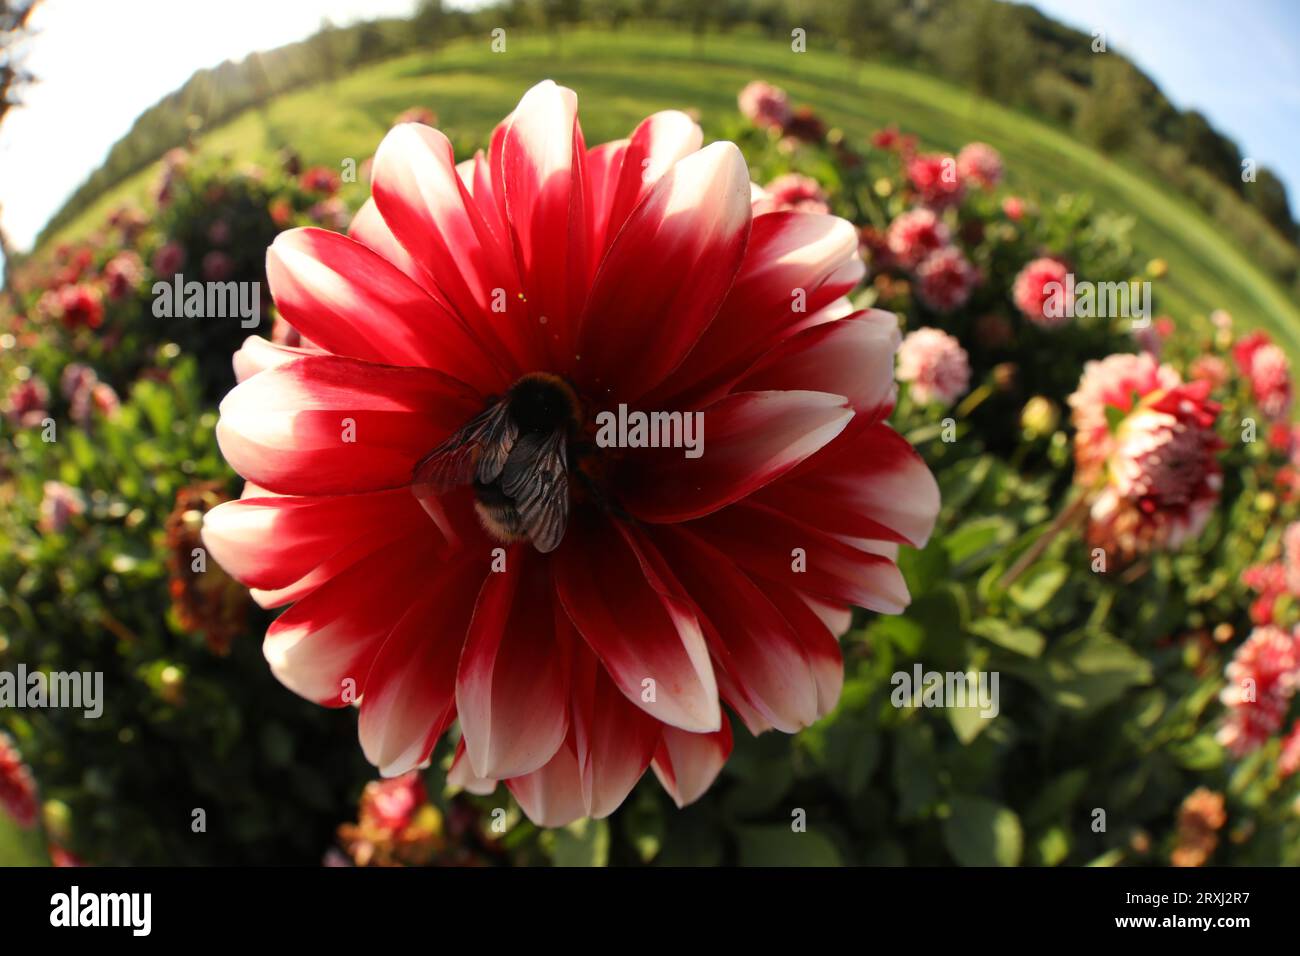 Bumblebee collecting nectar from dahlia flower outdoors. Fisheye lens Stock Photo